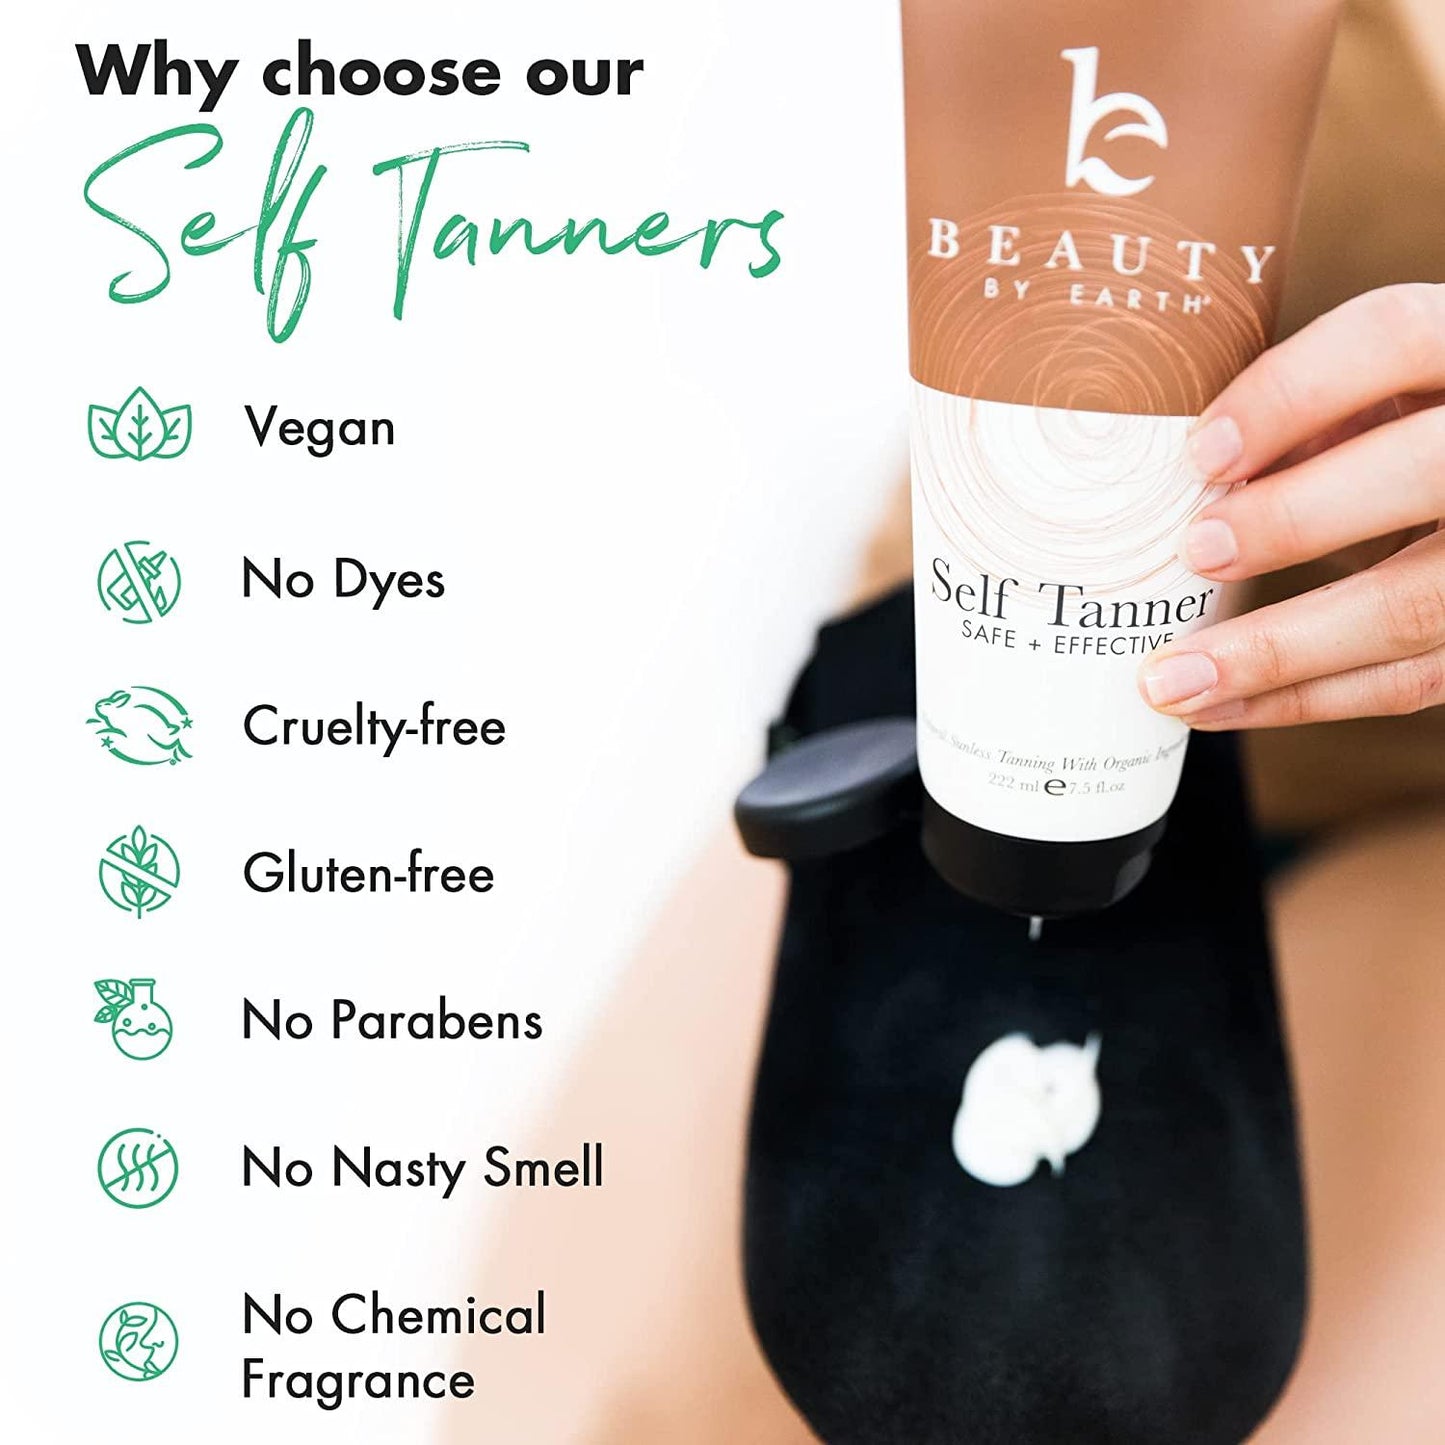 Beauty by Earth Clean Self Tanner Body Lotion